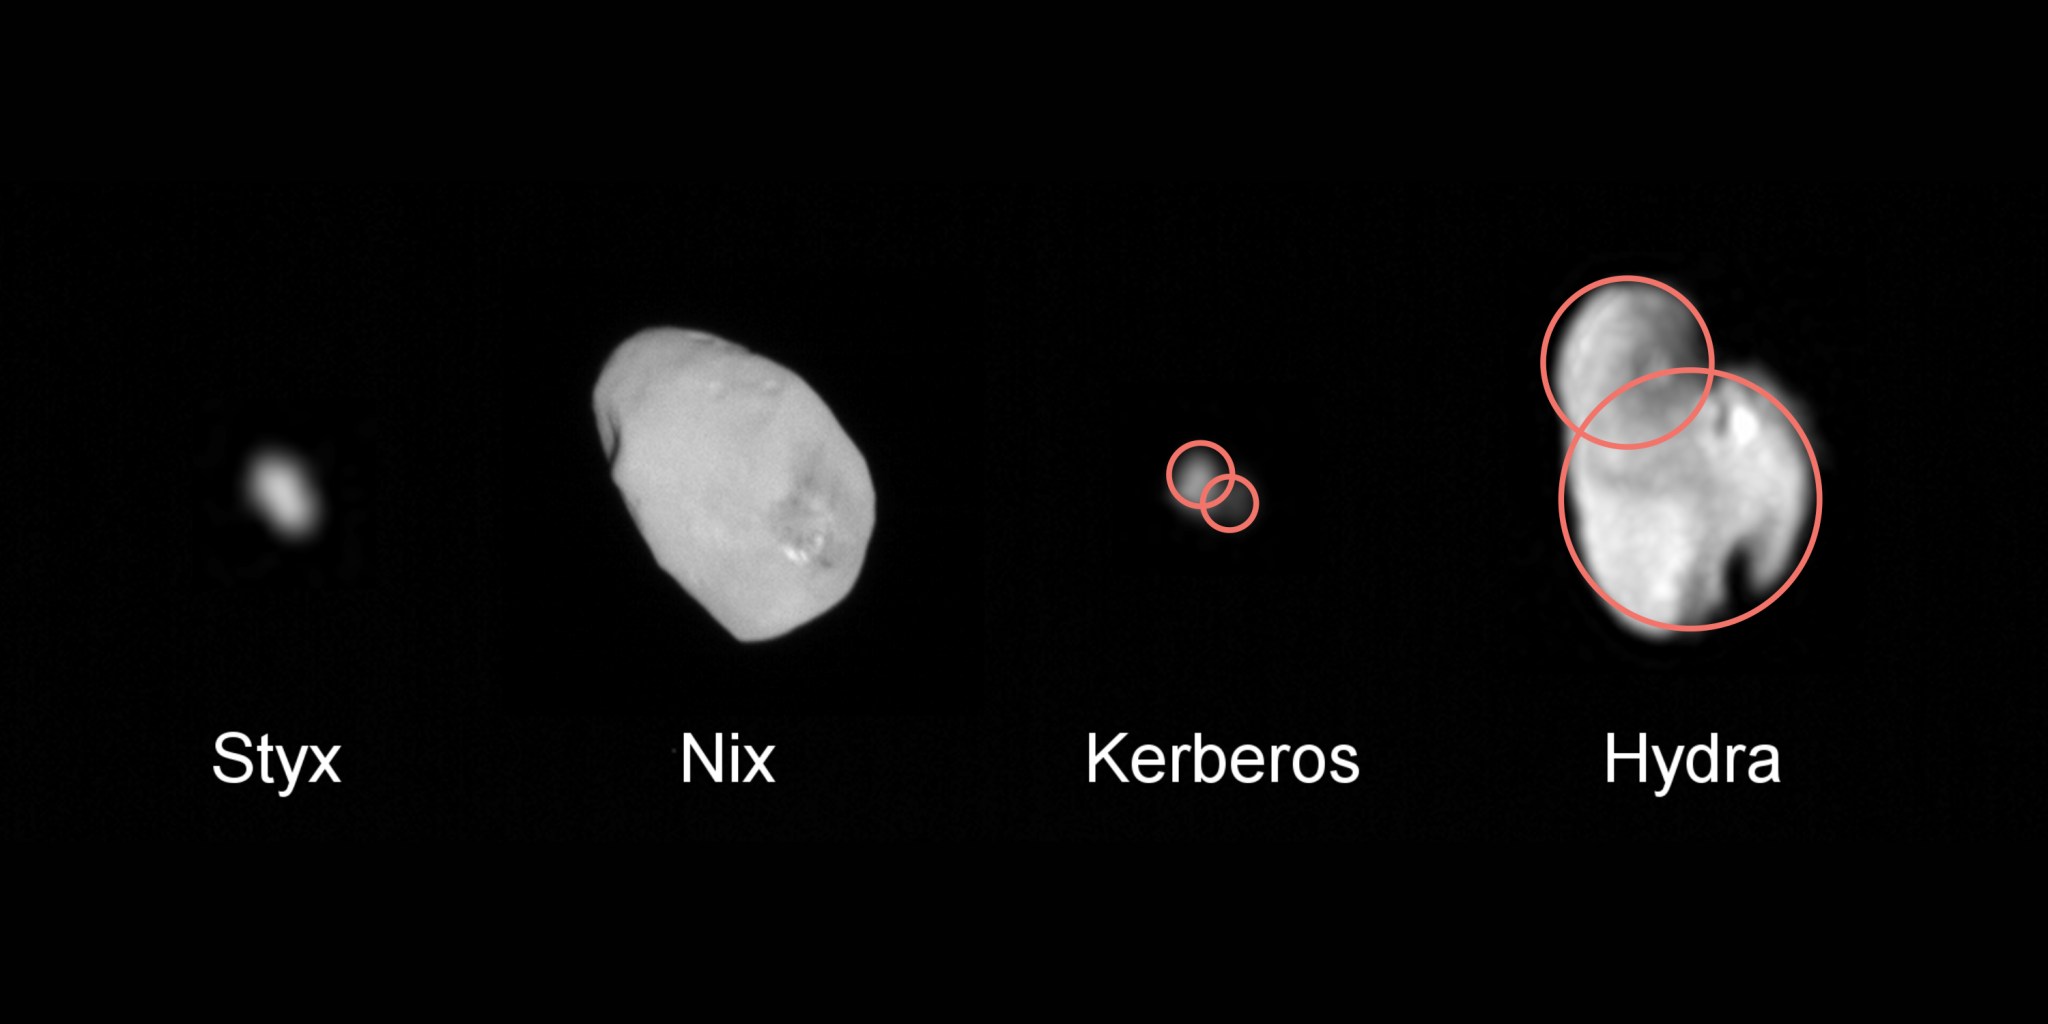 New Horizons data indicates that at least two (and possibly all four) of Pluto’s small moons may be the result of mergers betwee